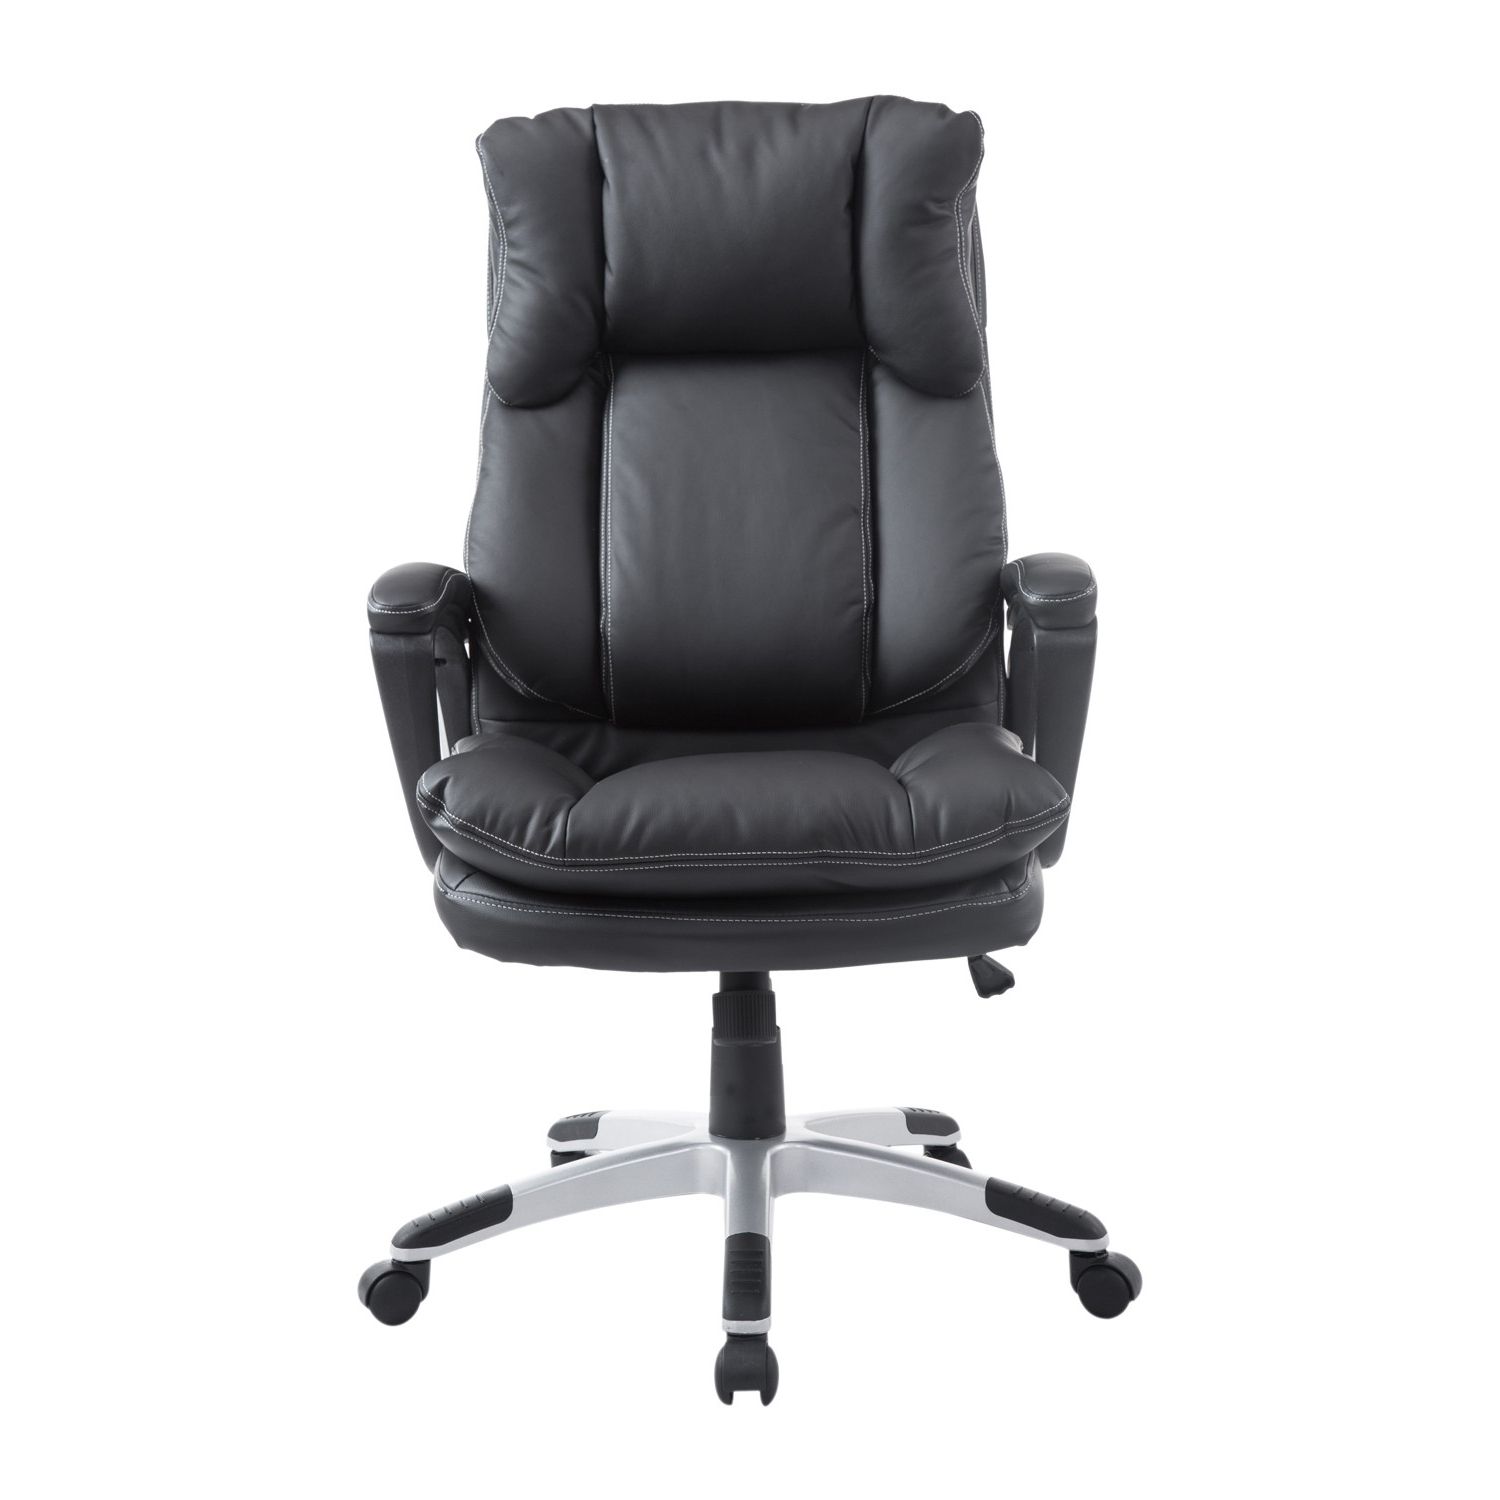 2019 Black Executive Office Chairs Intended For Homcom High Back Pu Leather Executive Office Desk Chair – Black (View 6 of 20)